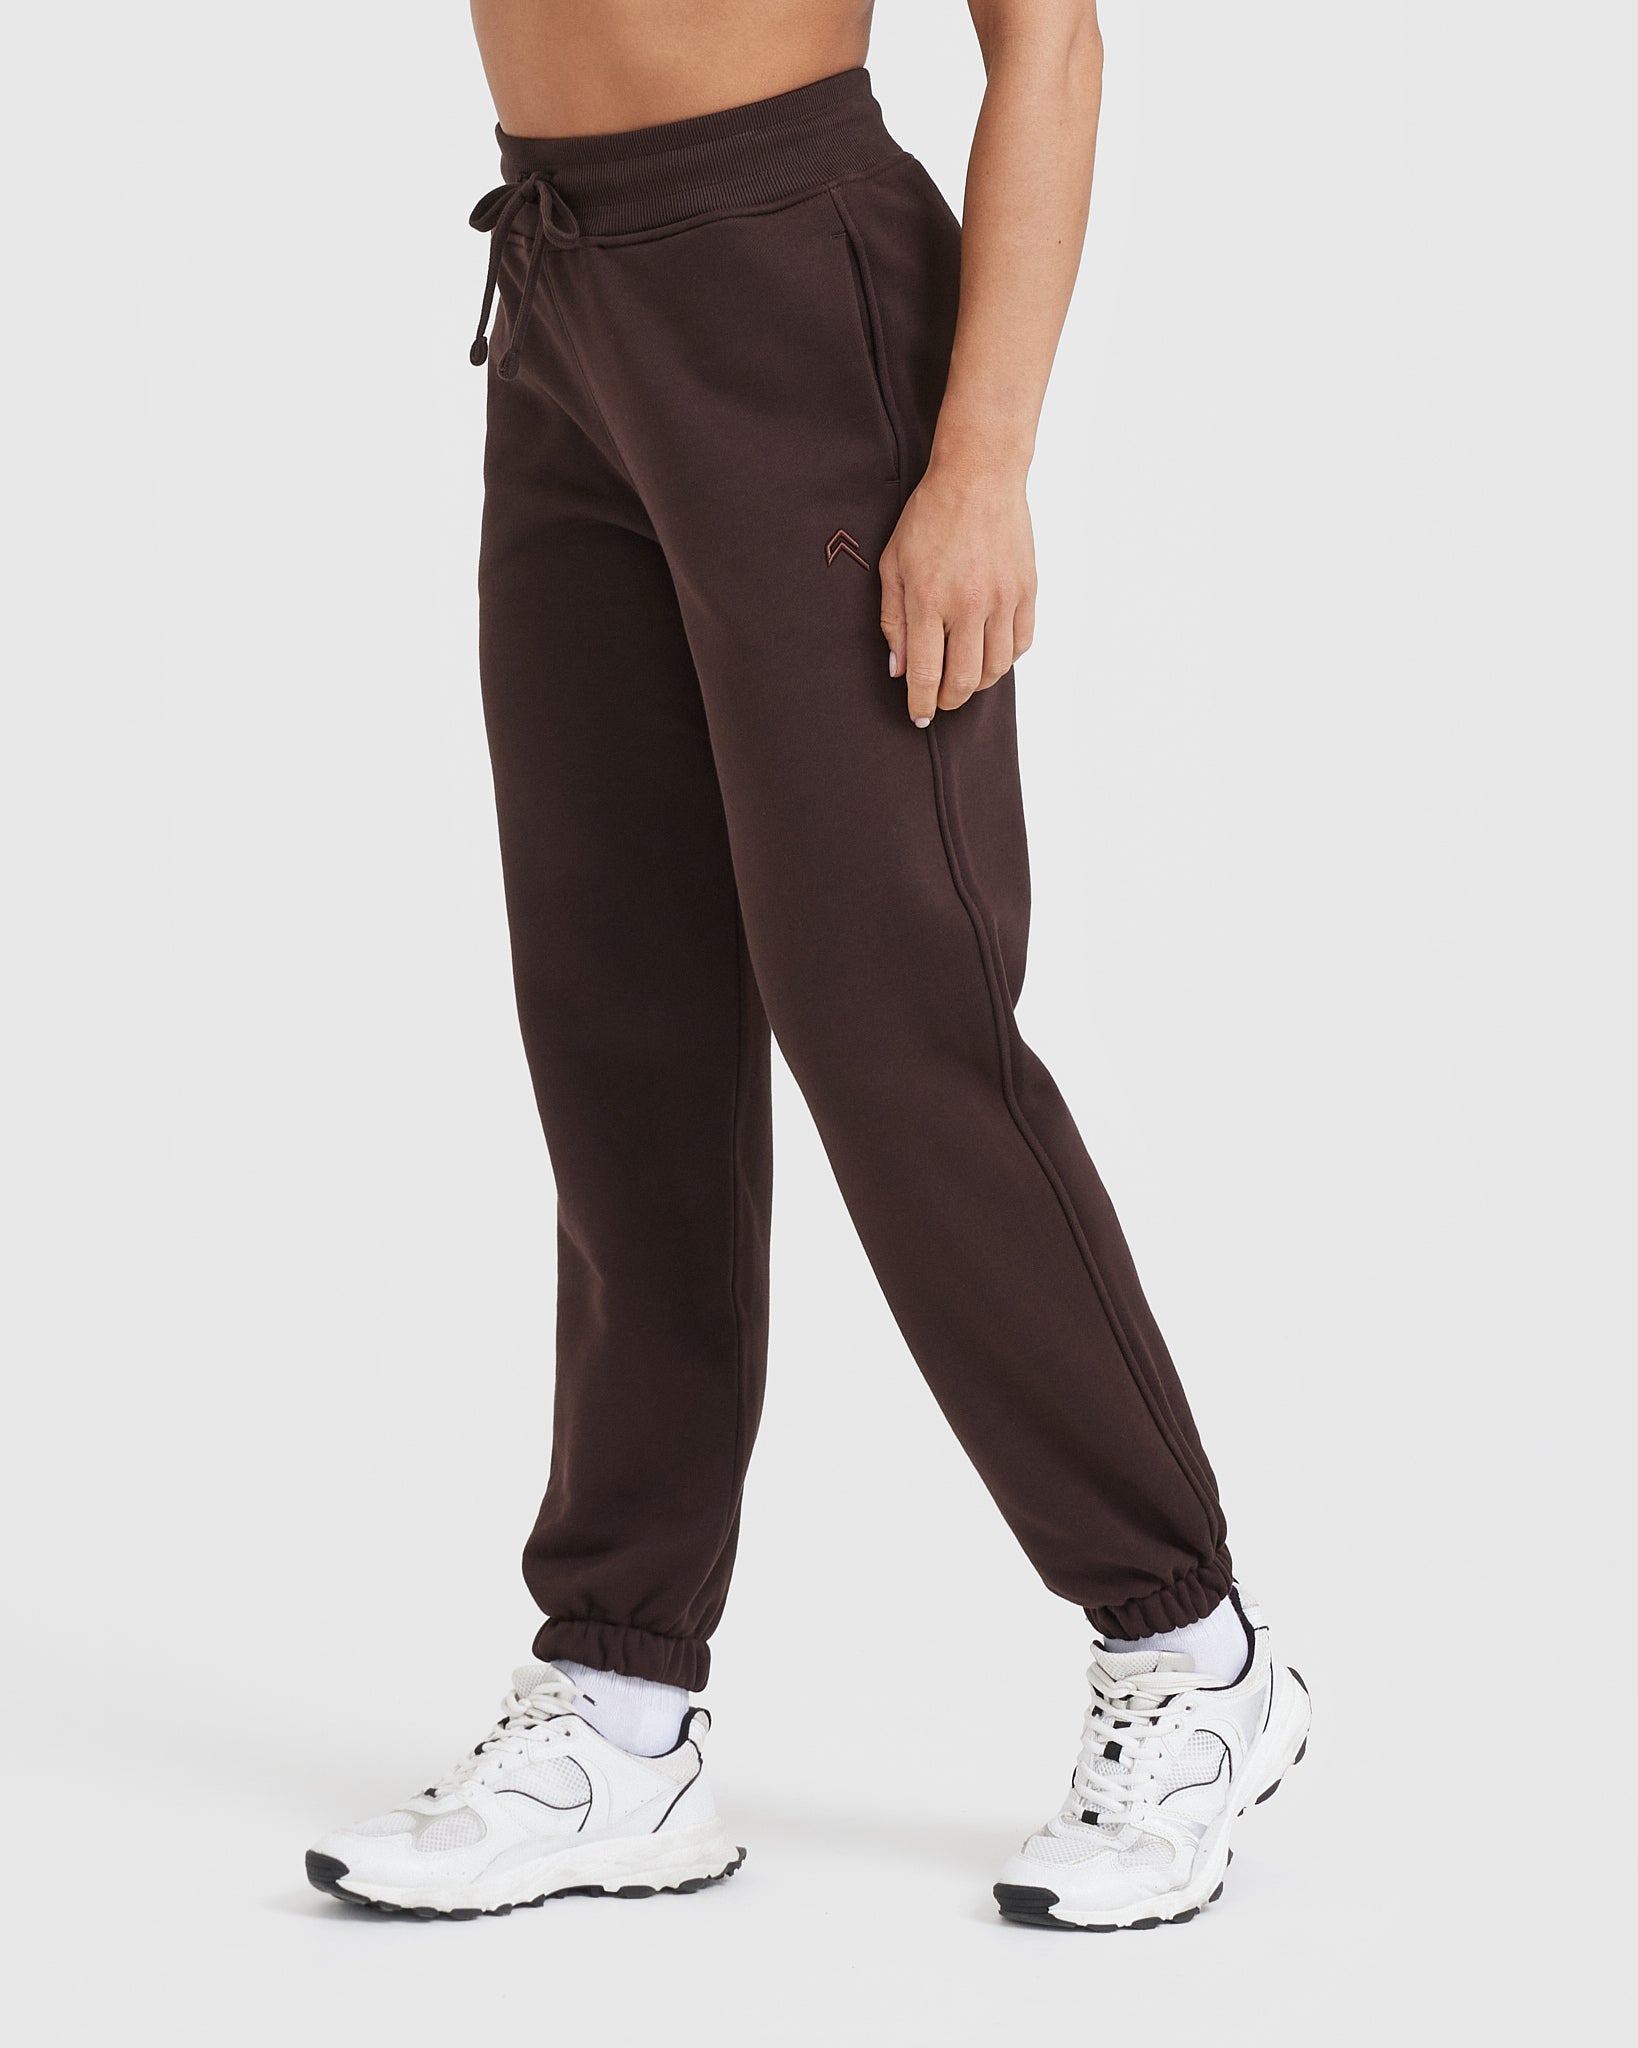 All Day Jogger 70% Cocoa | Oner Active US